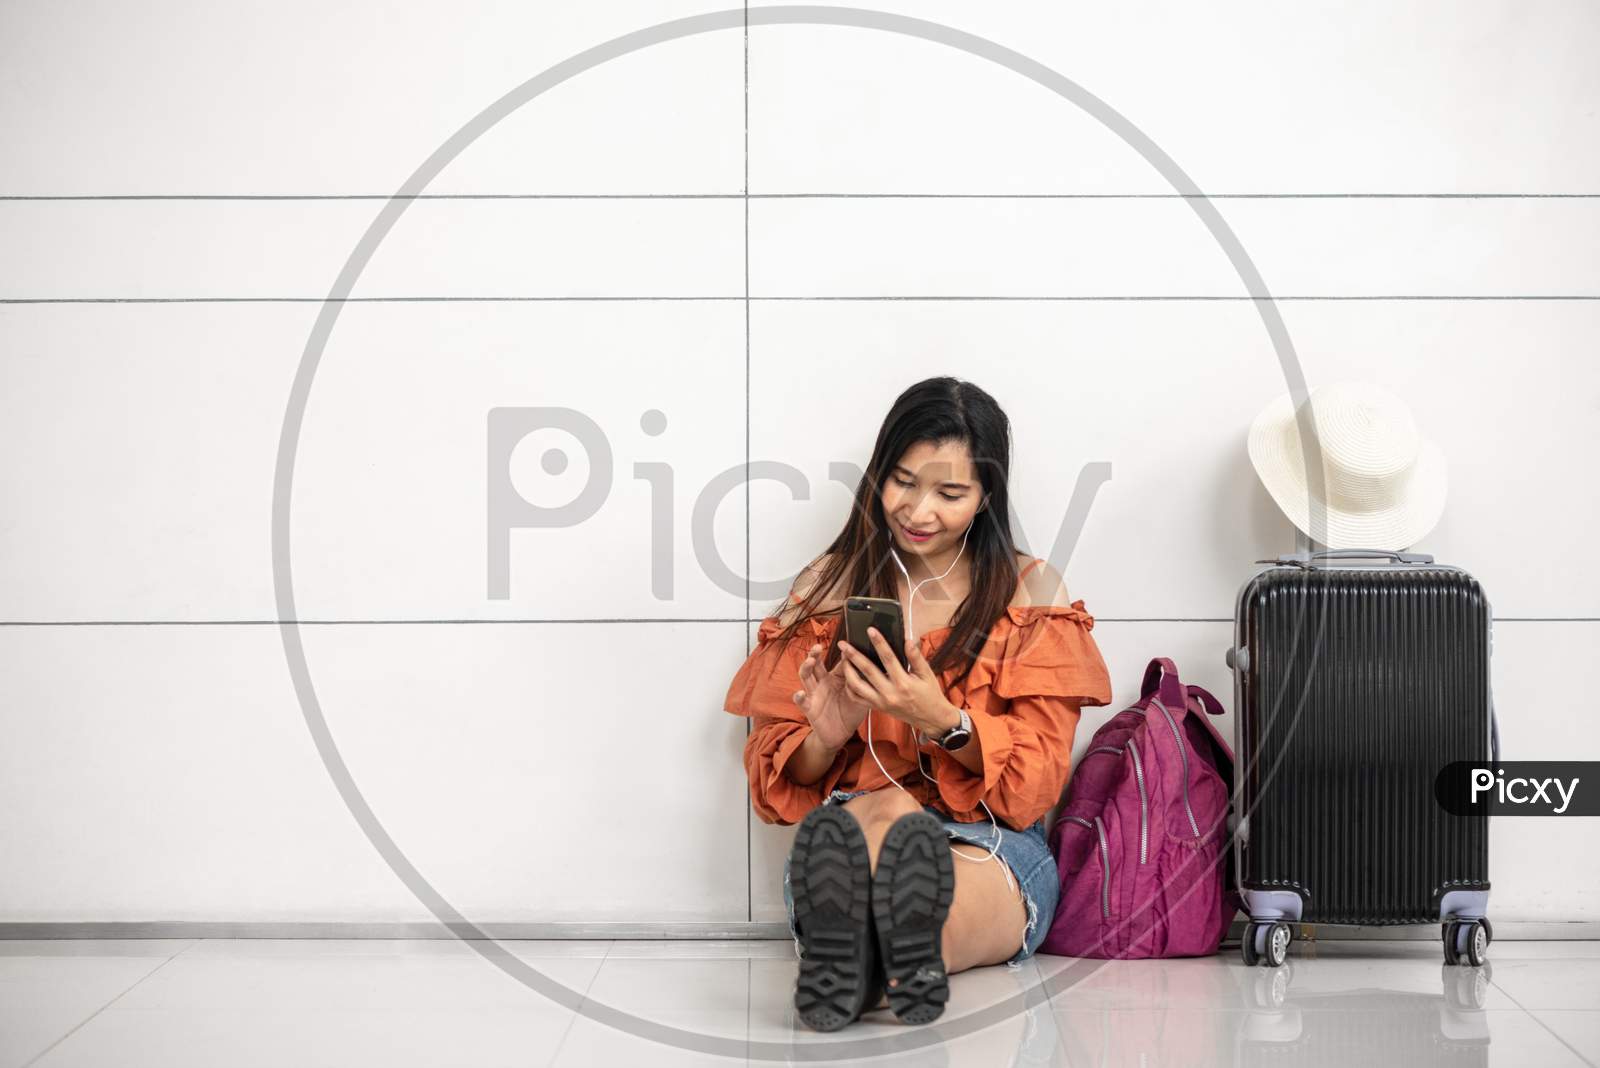 Asian Female Traveler Waiting For Flight And Using Smart Phone Outside Lounge In Airport. Travel And People Lifestyle Concept. Transportation And Passenger Theme.